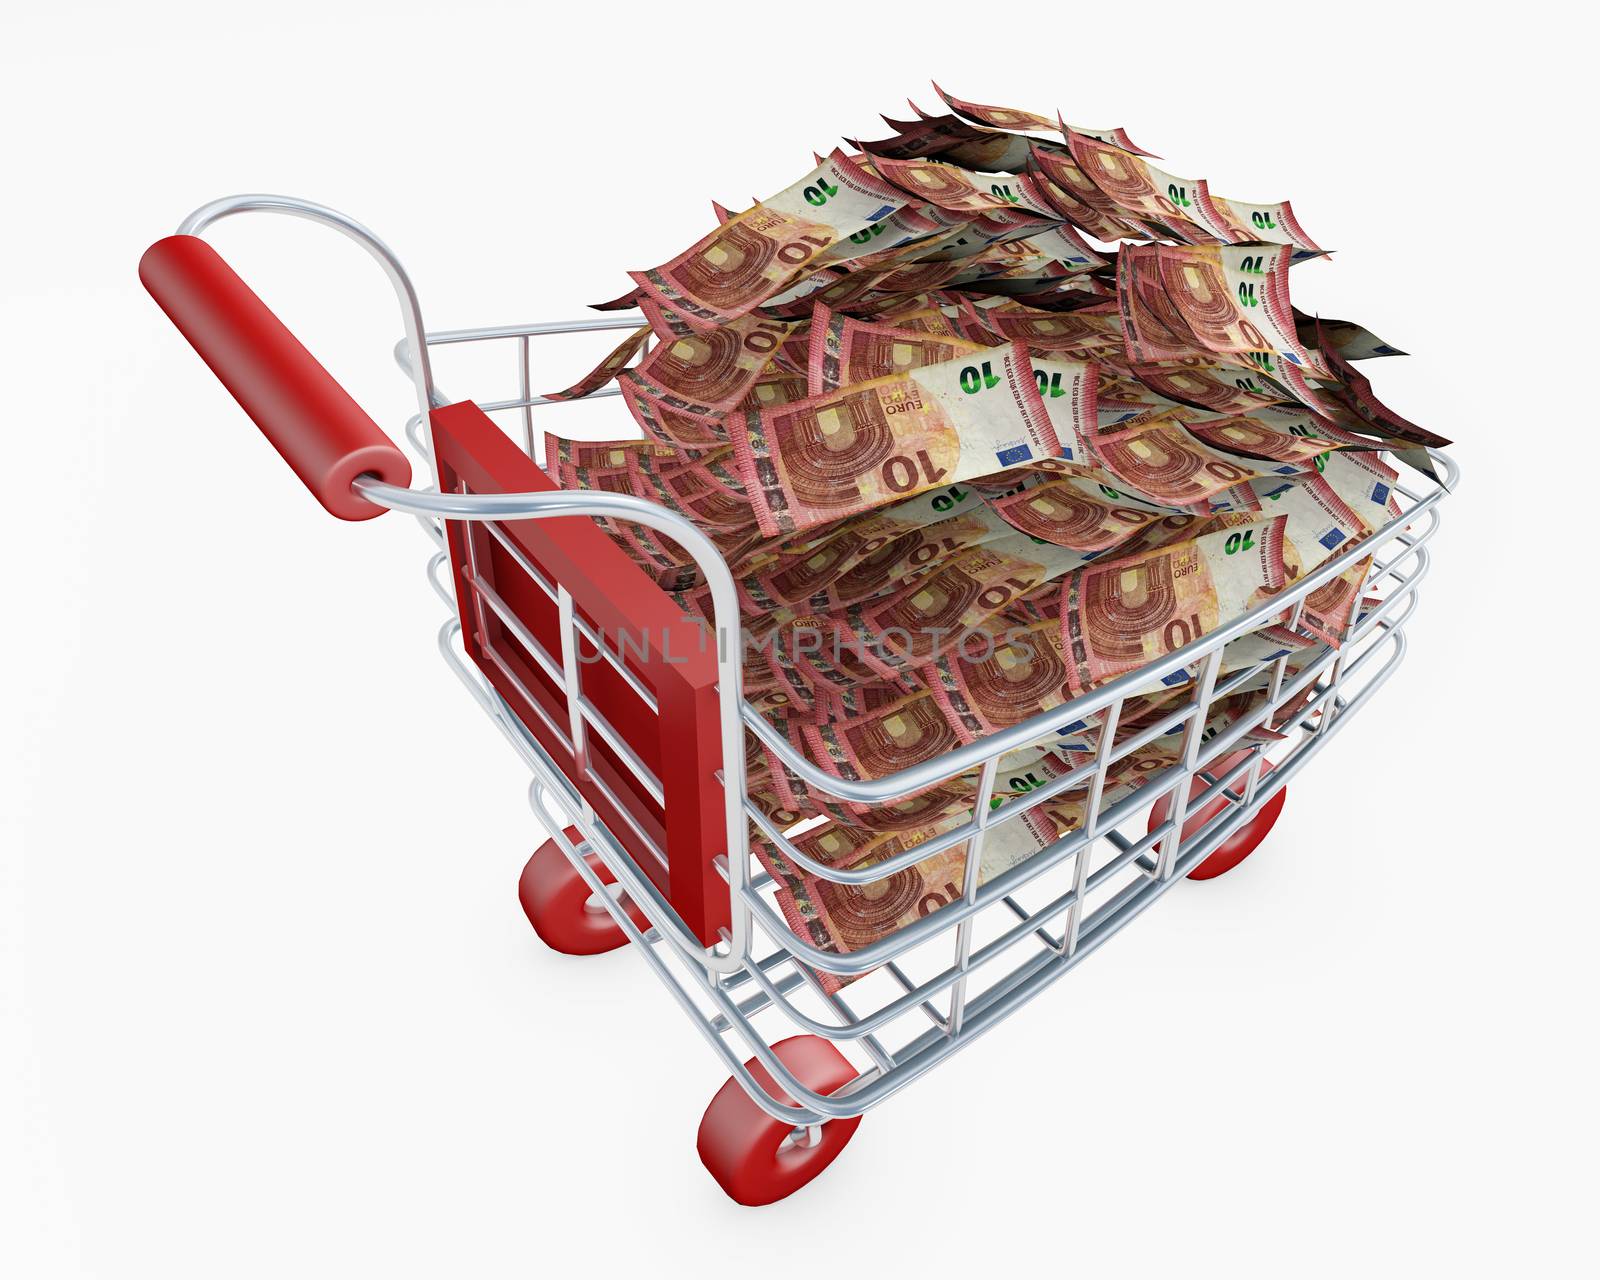 Shopping cart full of money euro banknotes 3d rendering by F1b0nacci